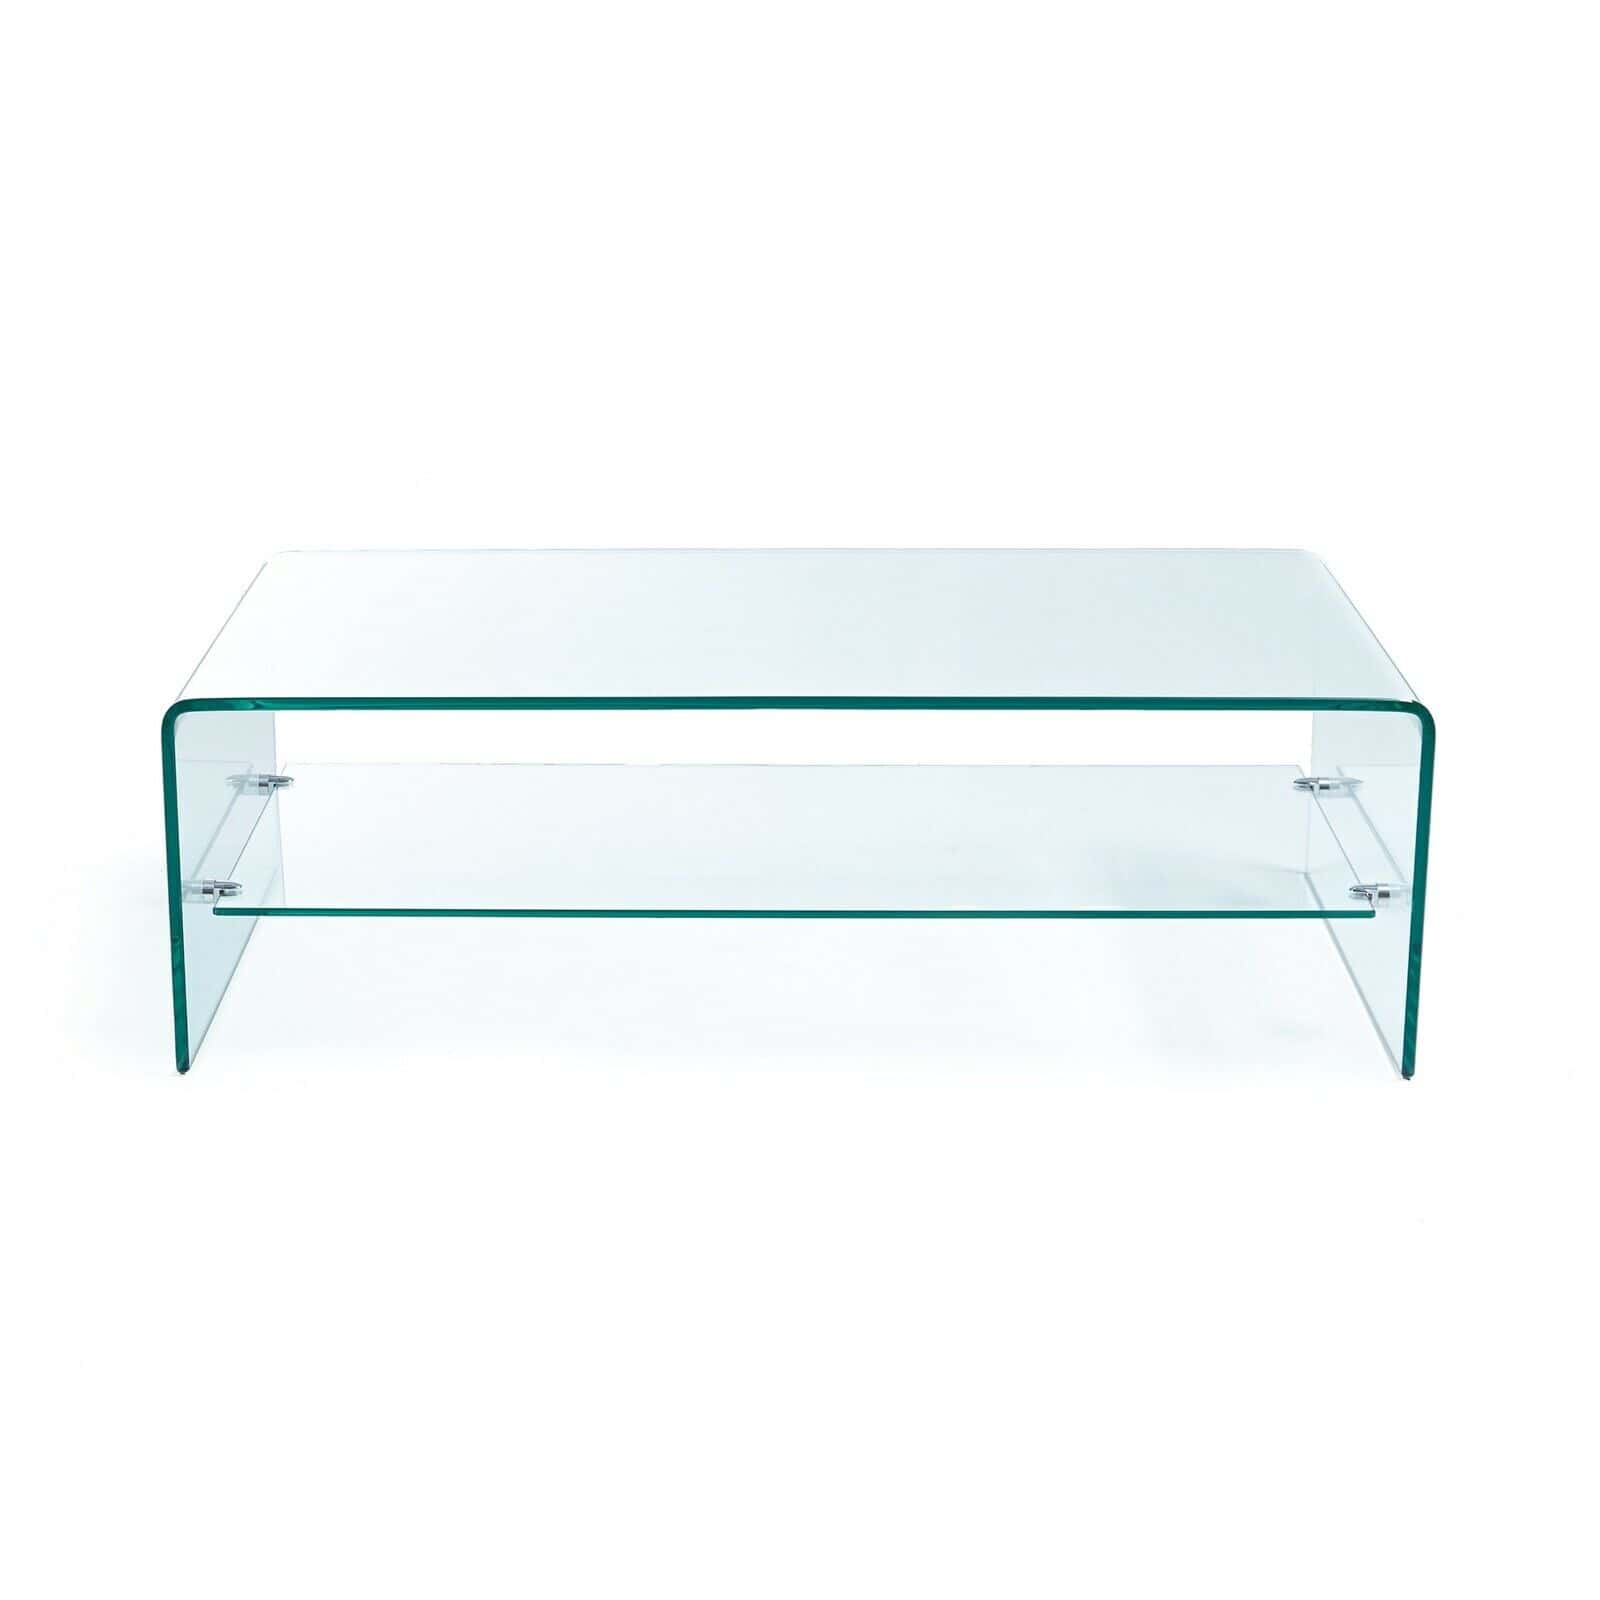 A glass coffee table on a white background.